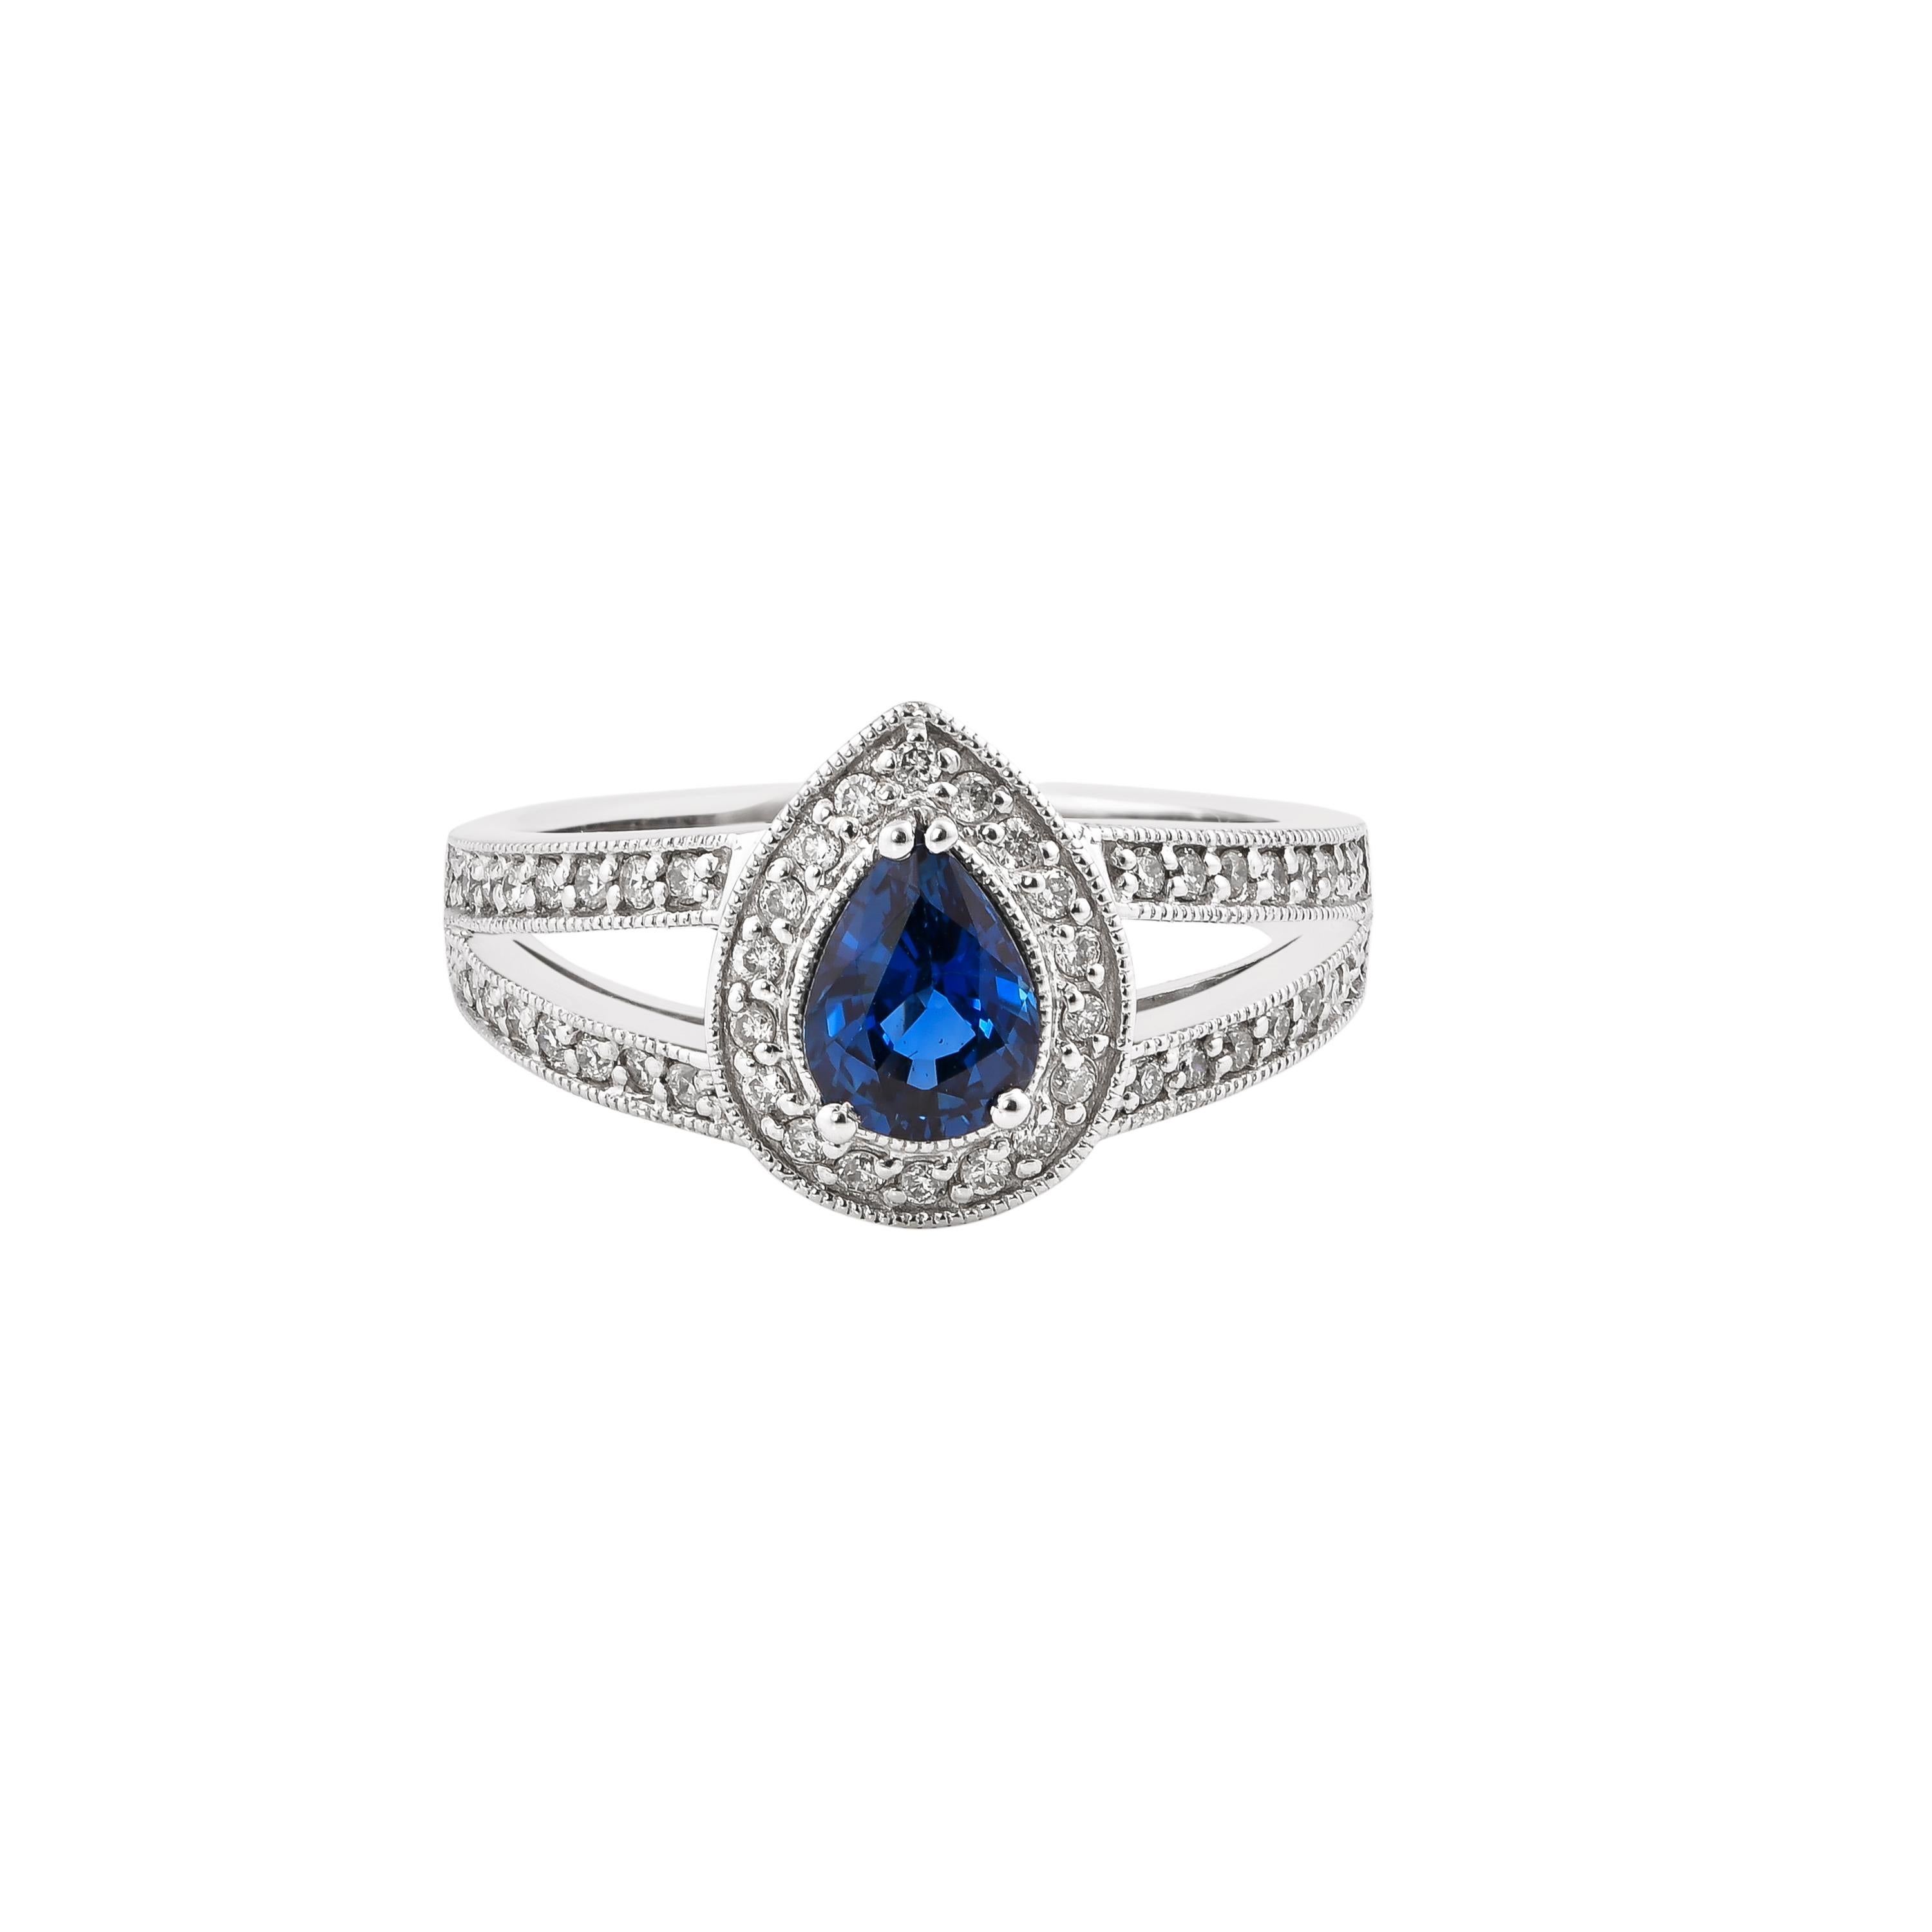 Contemporary 0.85 Carat Blue Sapphire and White Diamond Ring in 14 Karat White Gold For Sale